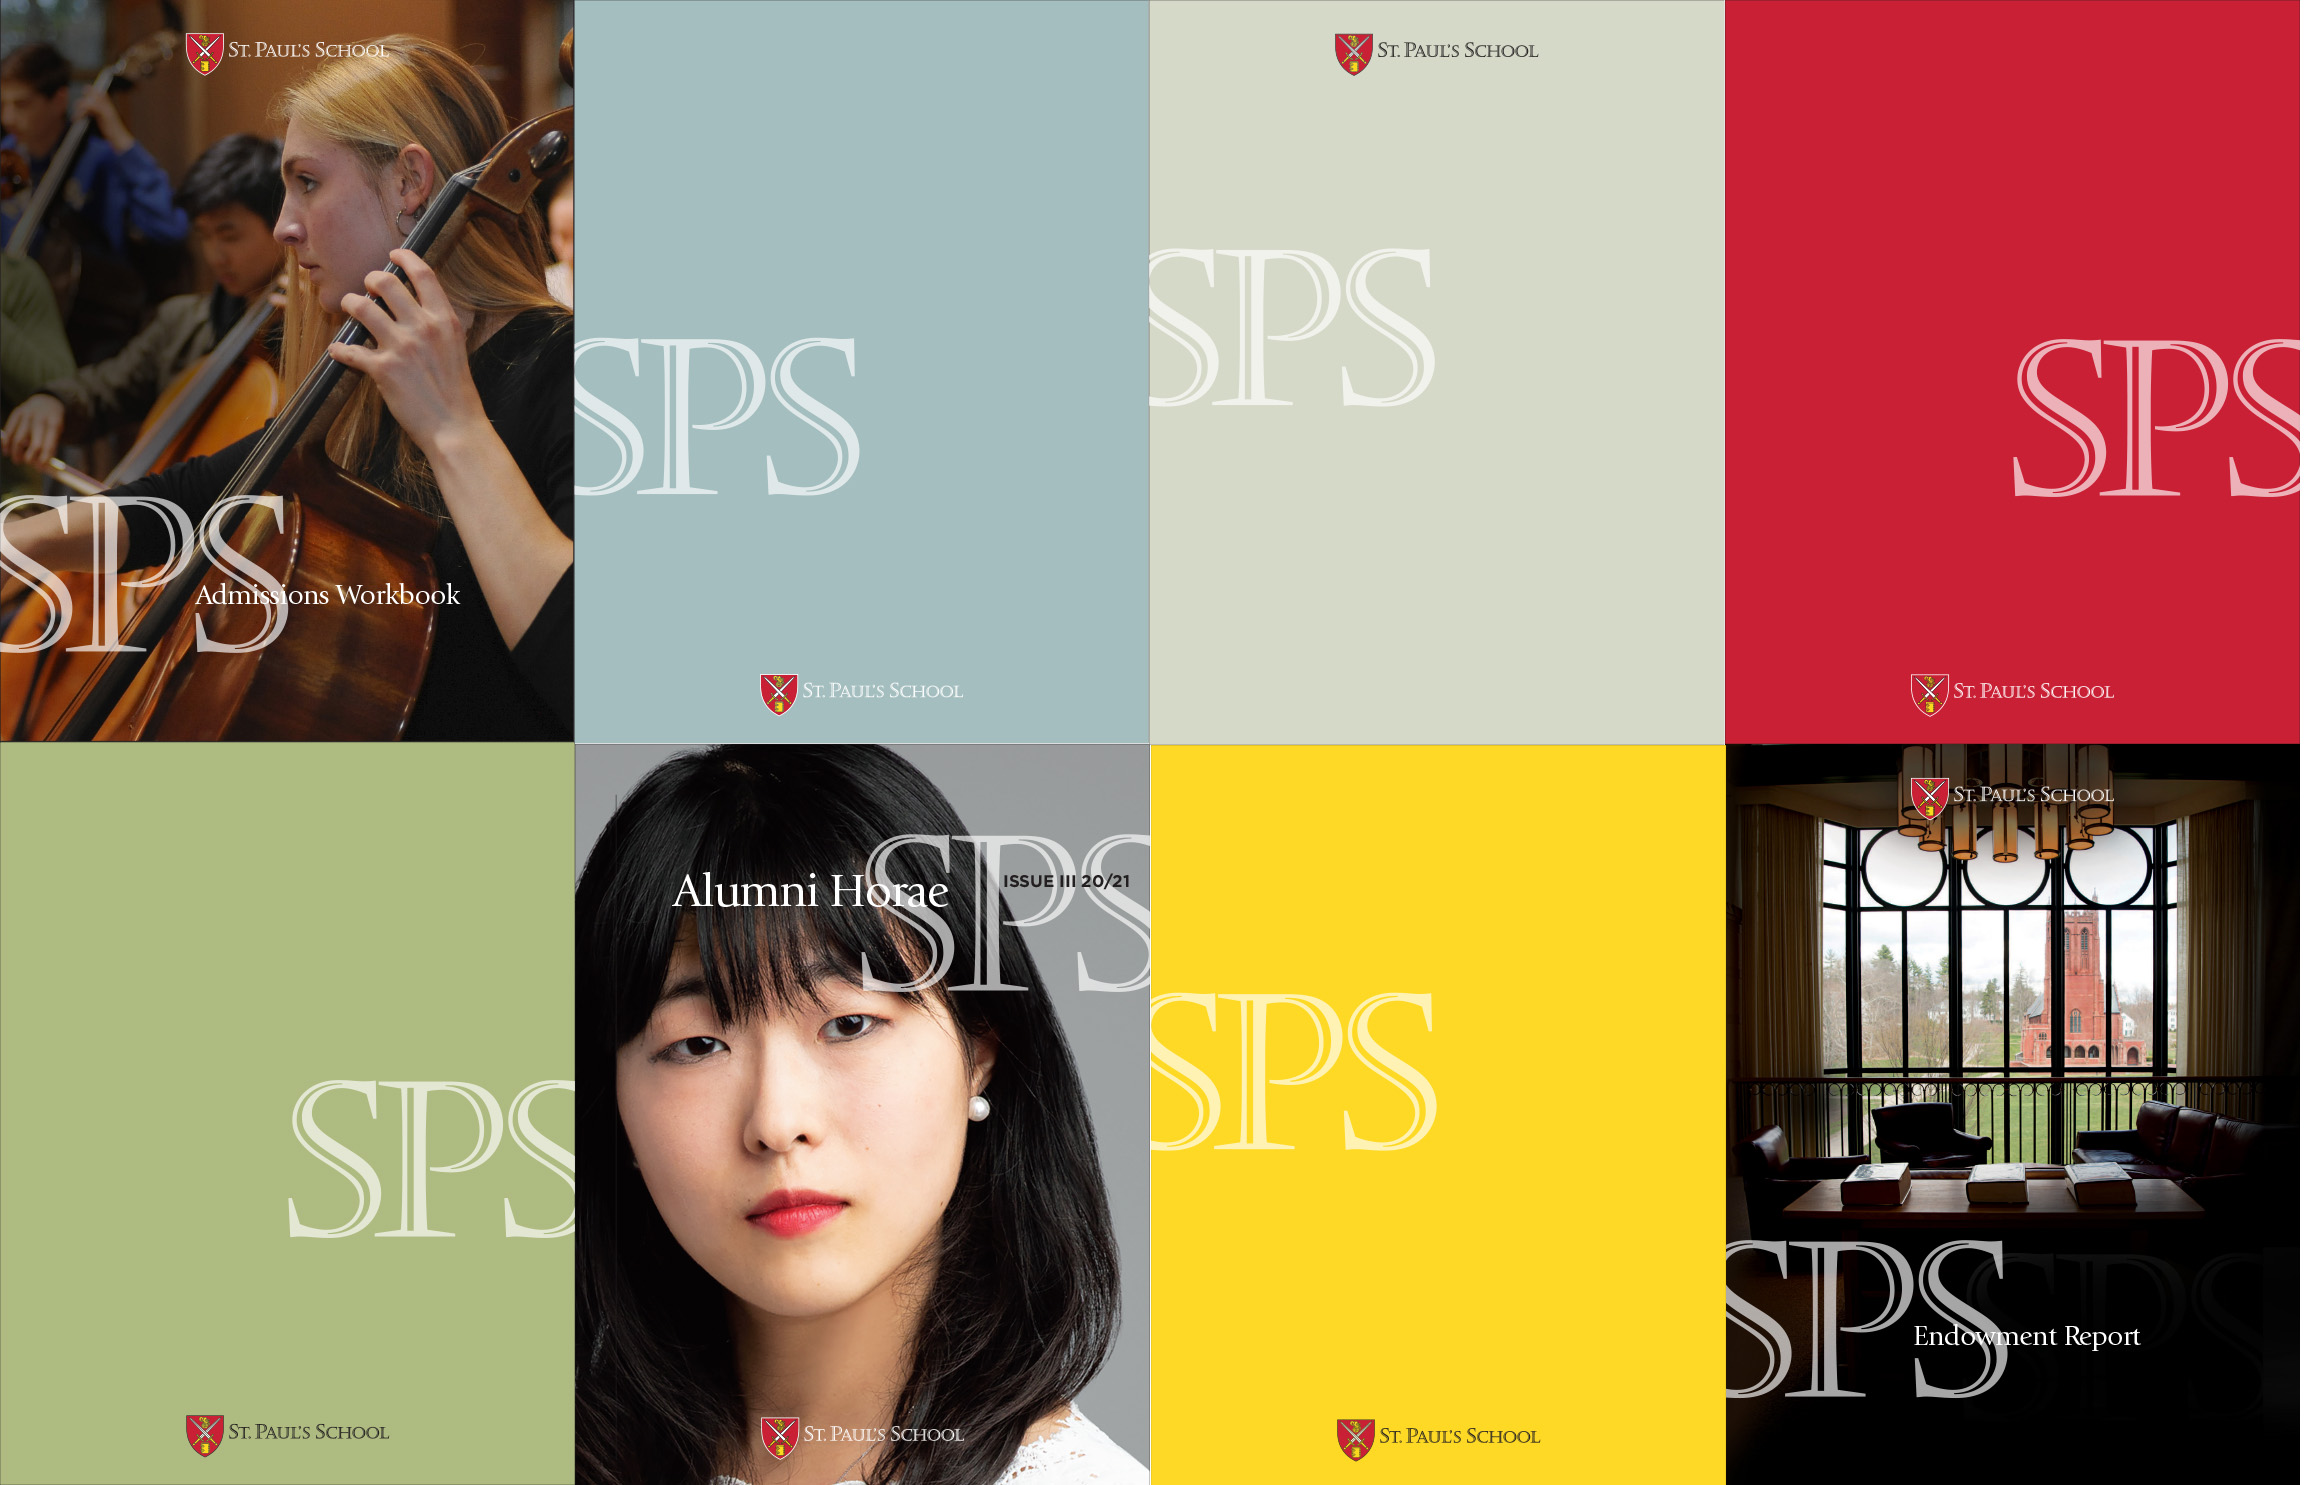 Various applications of the SPS St. Paul's School graphic on marketing materials